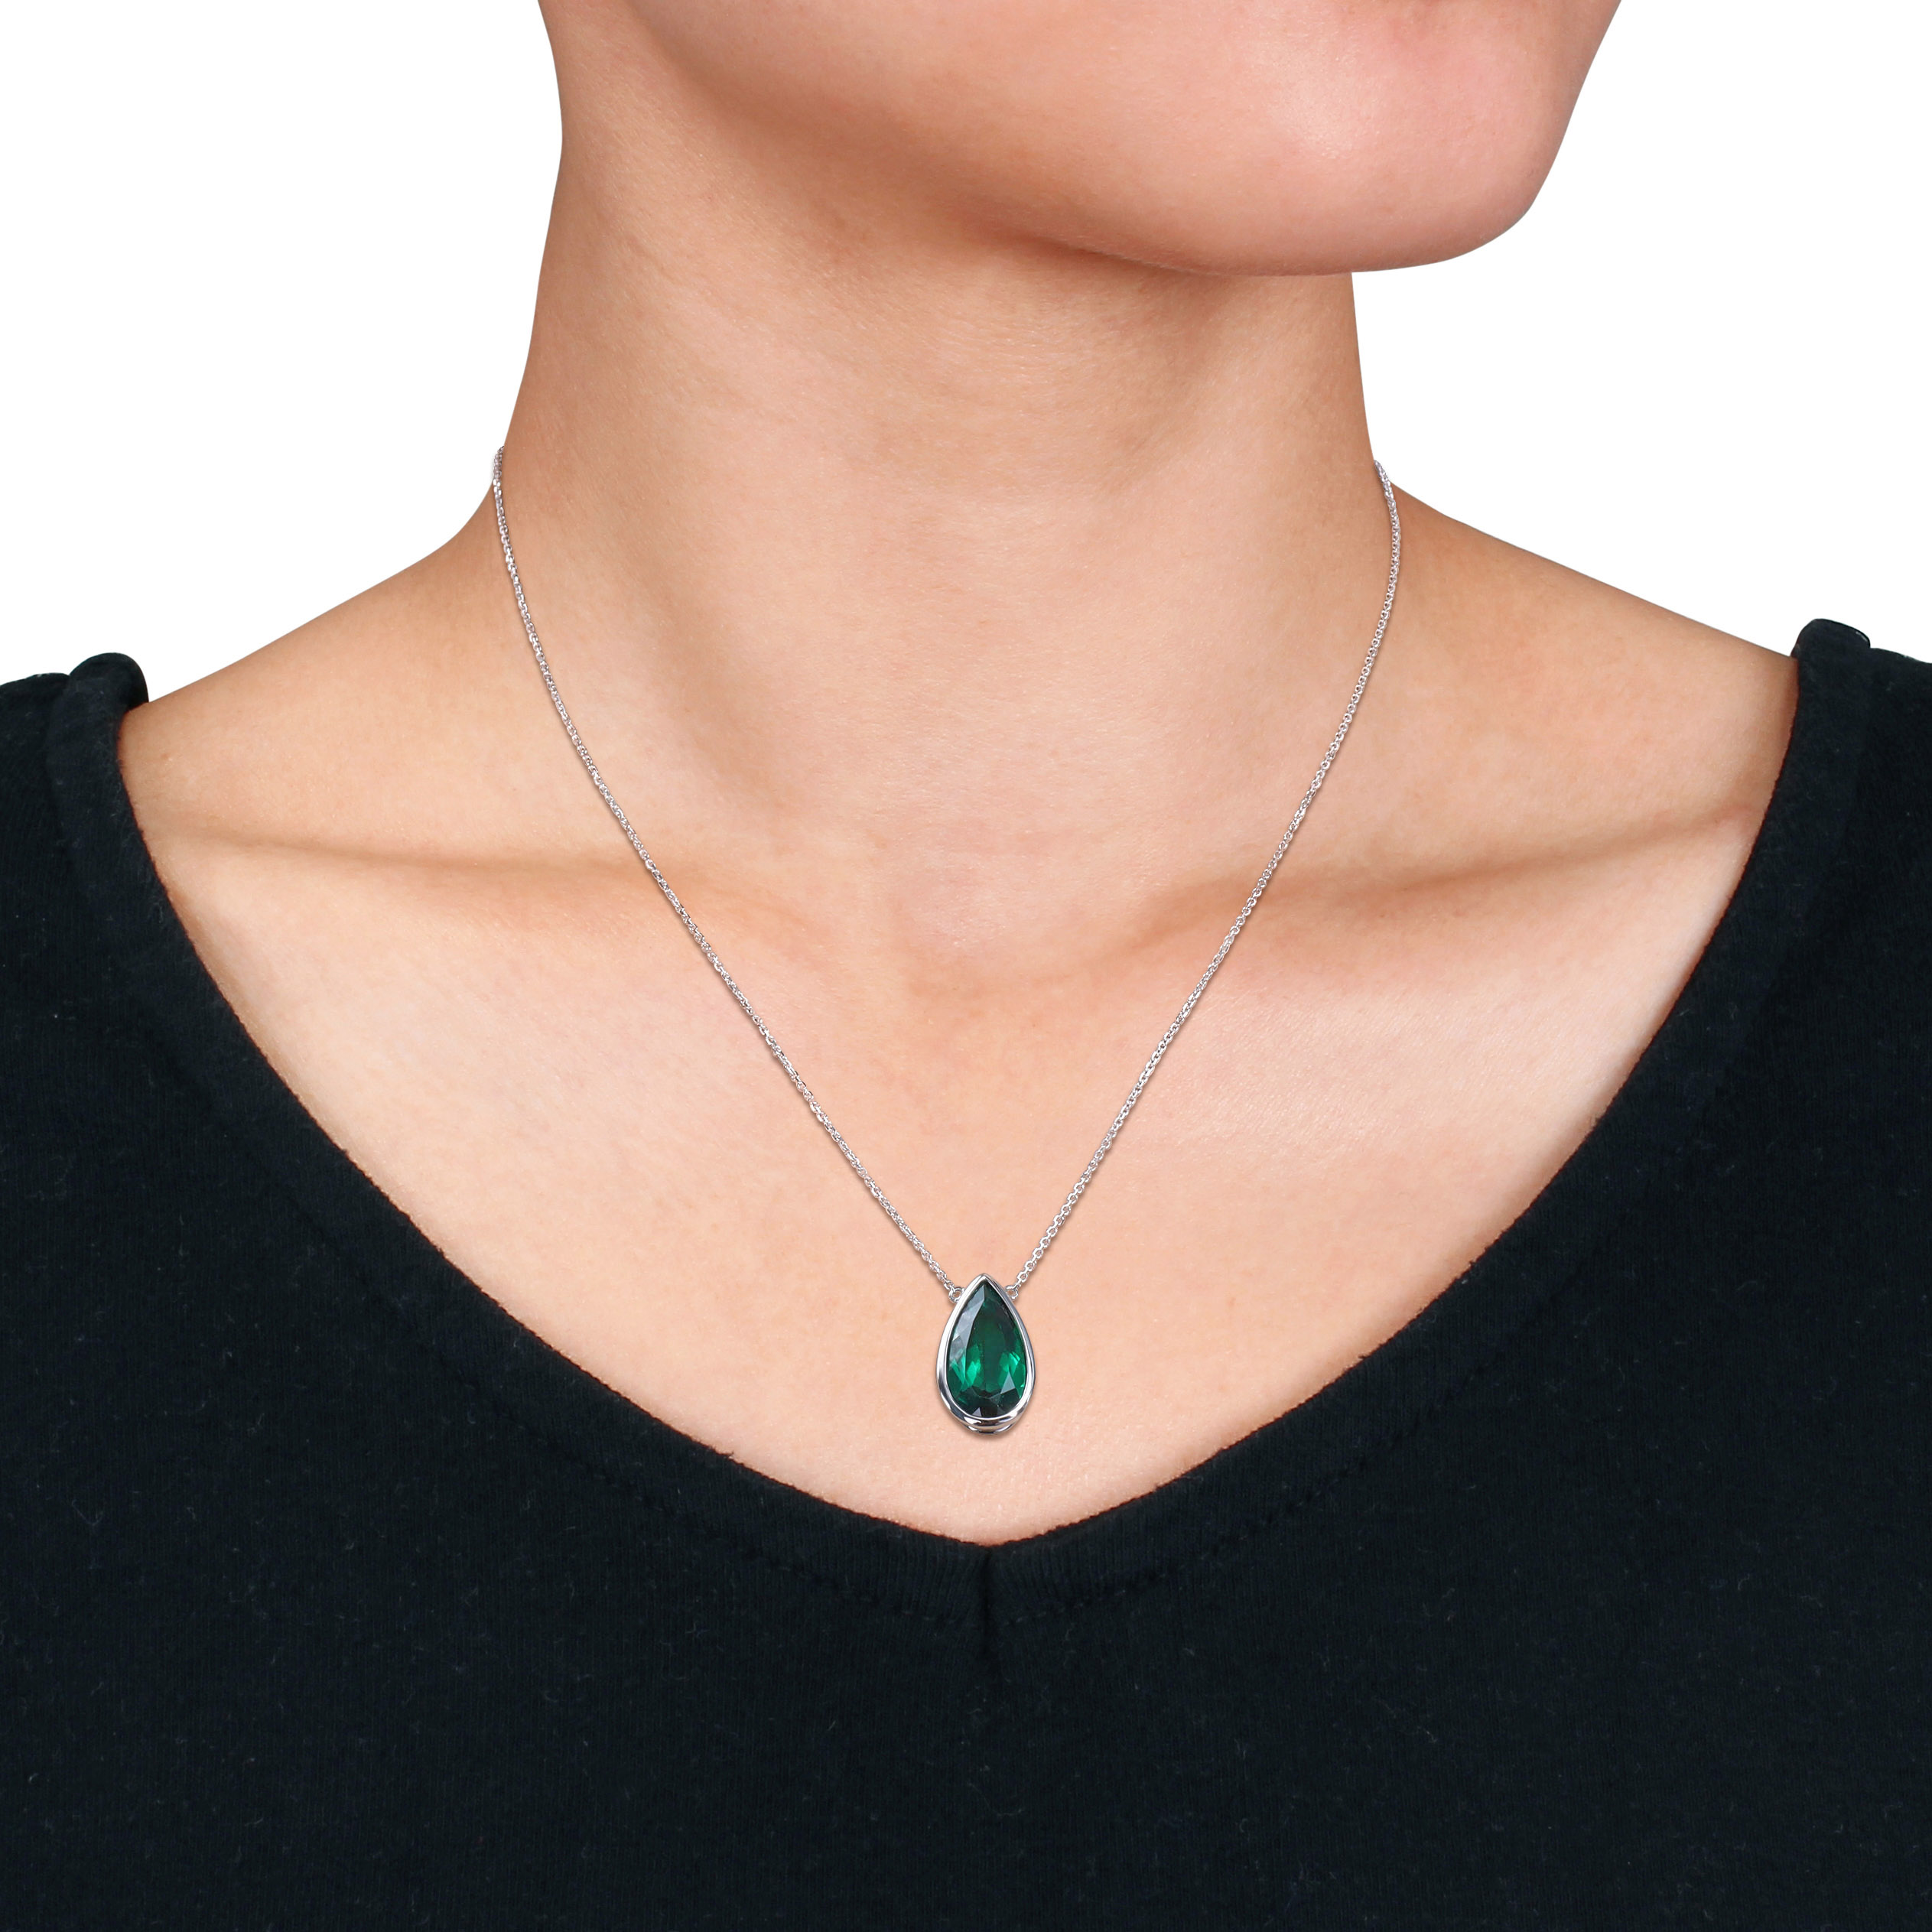 5 CT TGW Pear Shape Created Emerald Teardrop Pendant with Chain in 14k White Gold - 17 in.